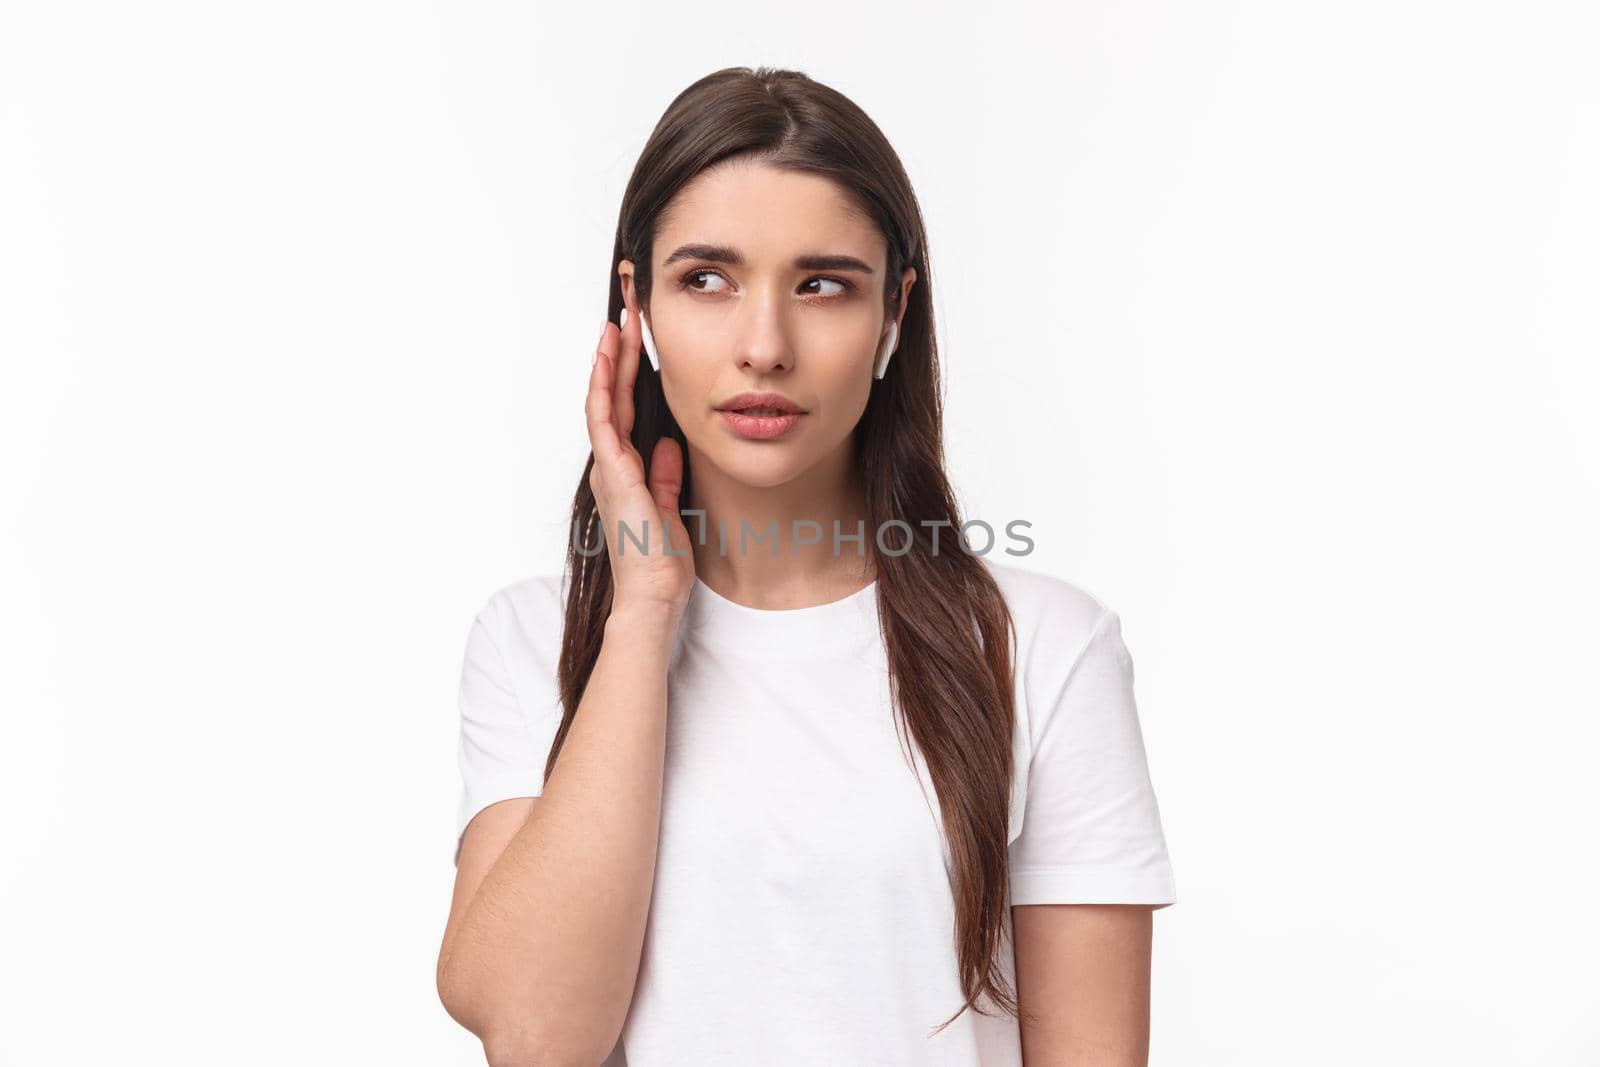 Close-up portrait of young caucasian woman in t-shirt, wearing wireless headphones, listen closely, fixing volume, touching earphone to answer call, standing white background enjoying music.